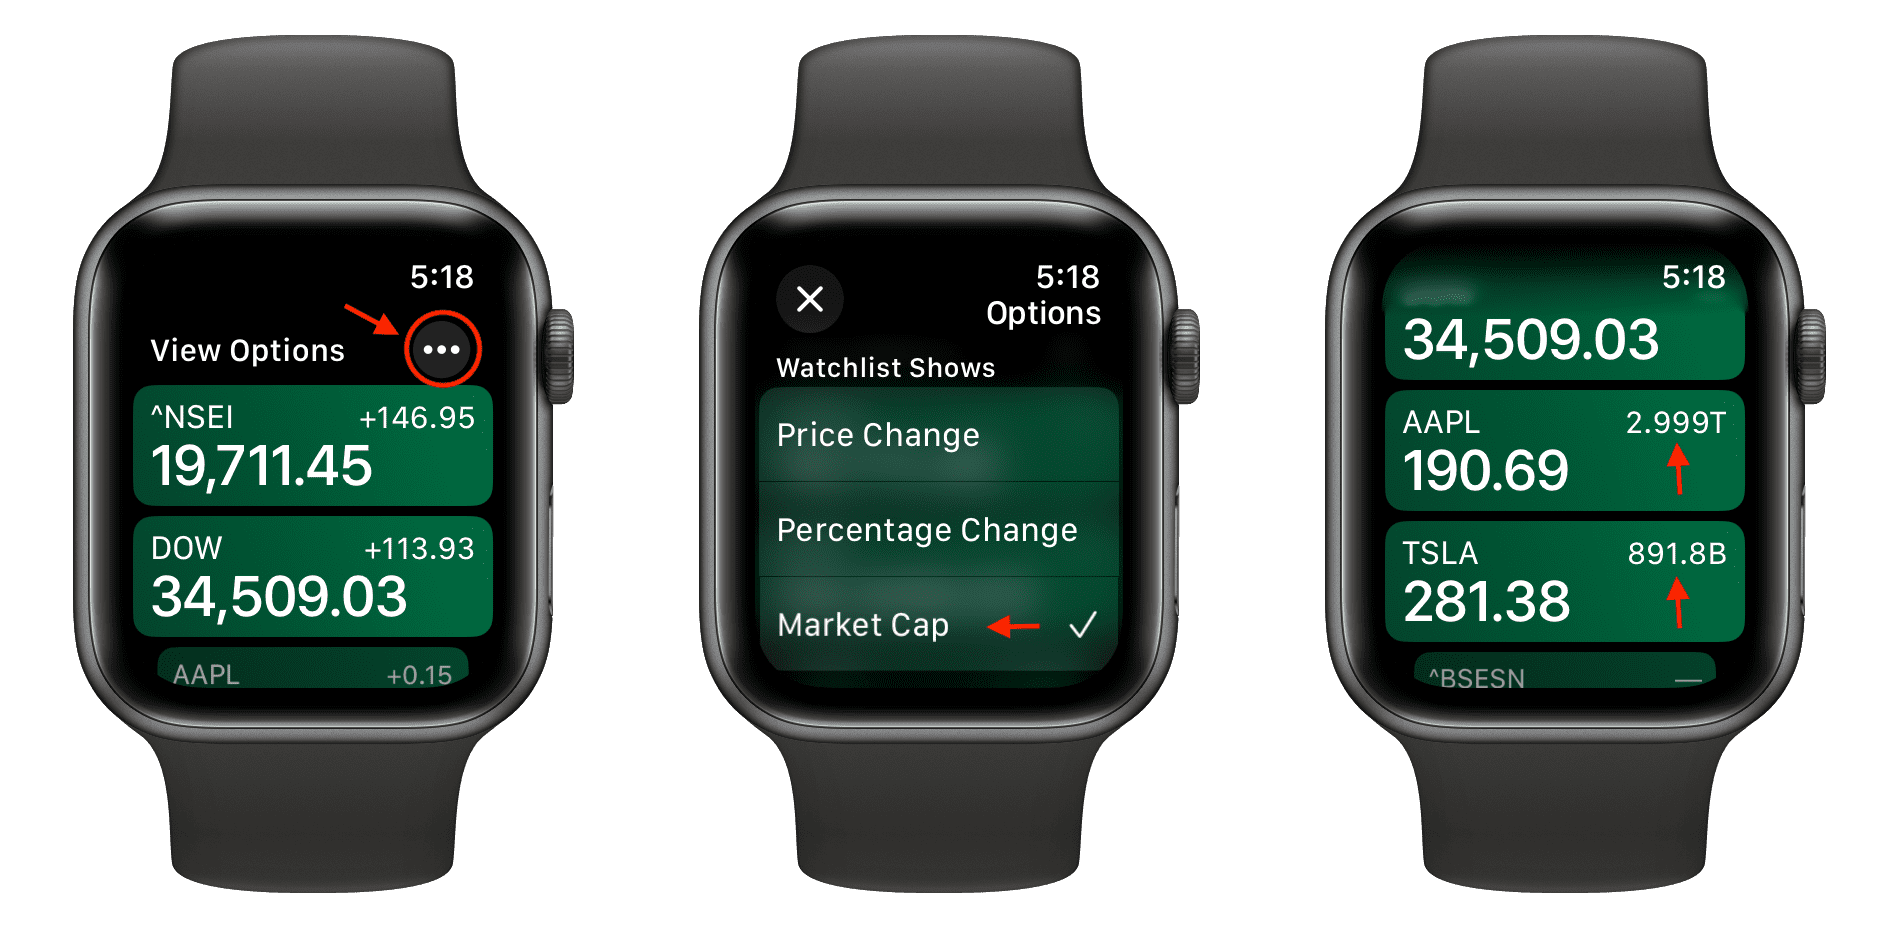 Customize Watchlist Shows in Stocks app on Apple Watch